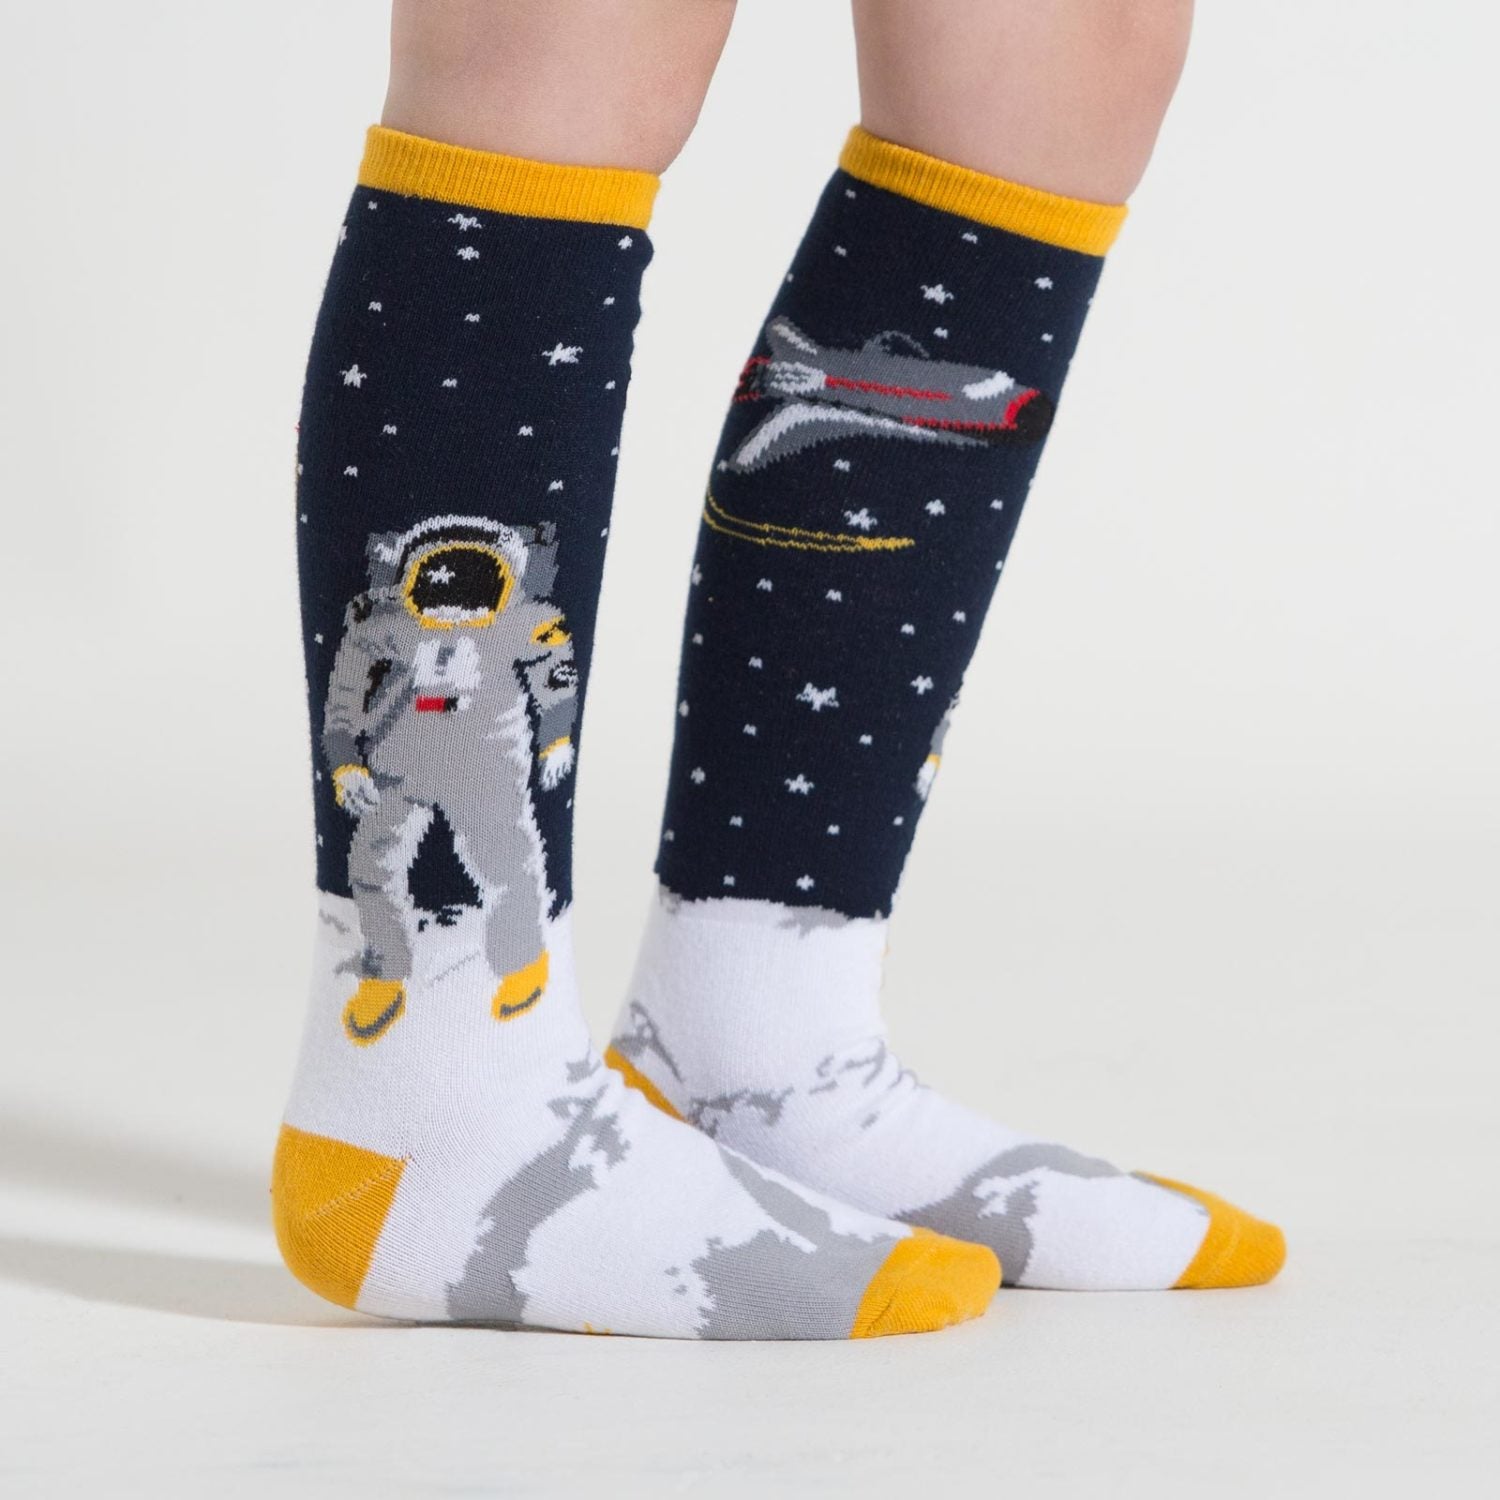 One Small Step Kid's Knee High Socks (Ages 7-10)